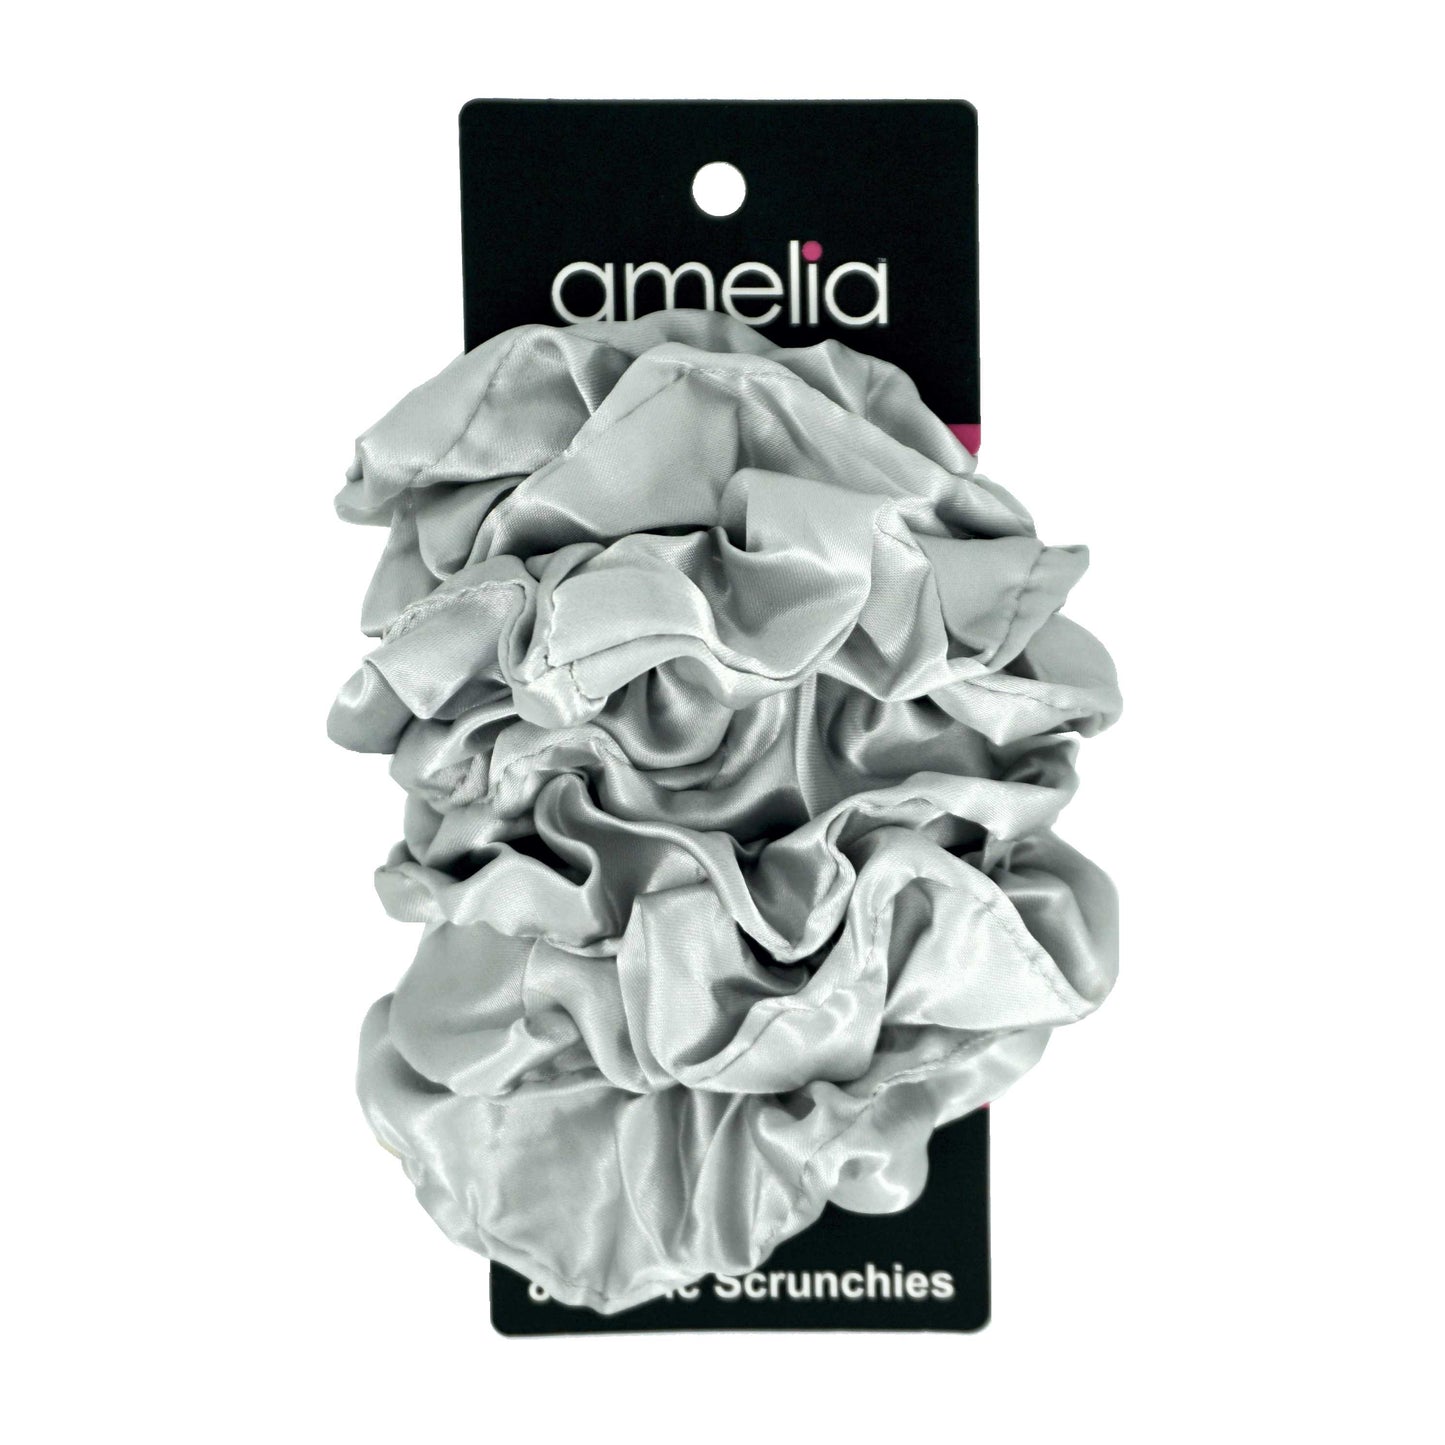 Amelia Beauty Products, Gray Satin Scrunchies, 3.5in Diameter, Gentle on Hair, Strong Hold, No Snag, No Dents or Creases. 8 Pack